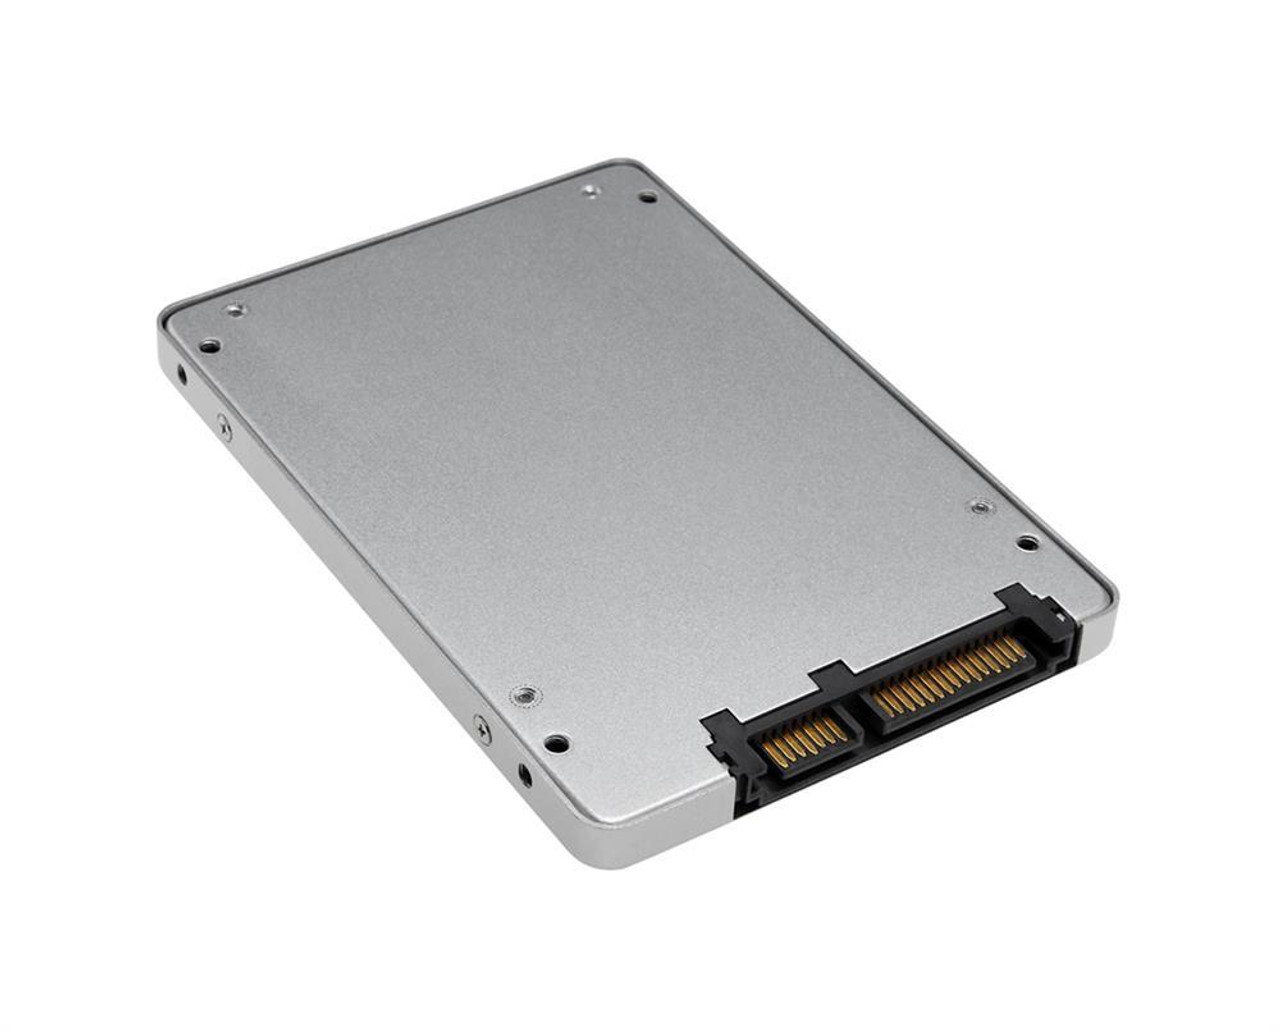 03B0100030600 ASUS 64GB MLC SATA 6Gbps 2.5-inch Internal Solid State Drive (SSD) for All-in-one E Series